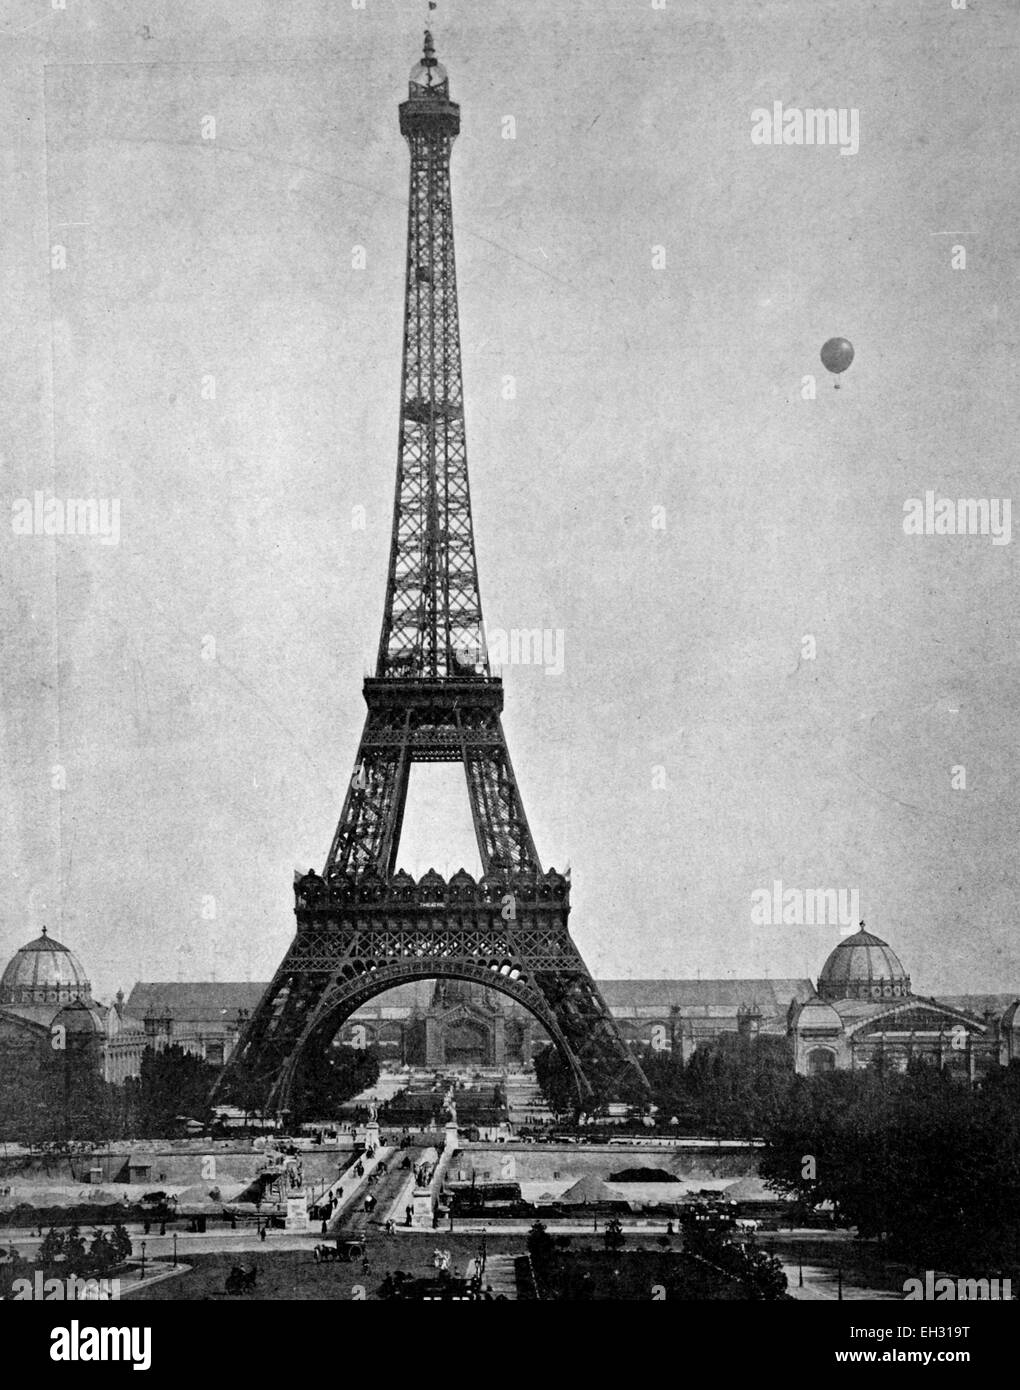 One of the first halftones, the Eiffel Tower, Paris, France, 1880 Stock Photo